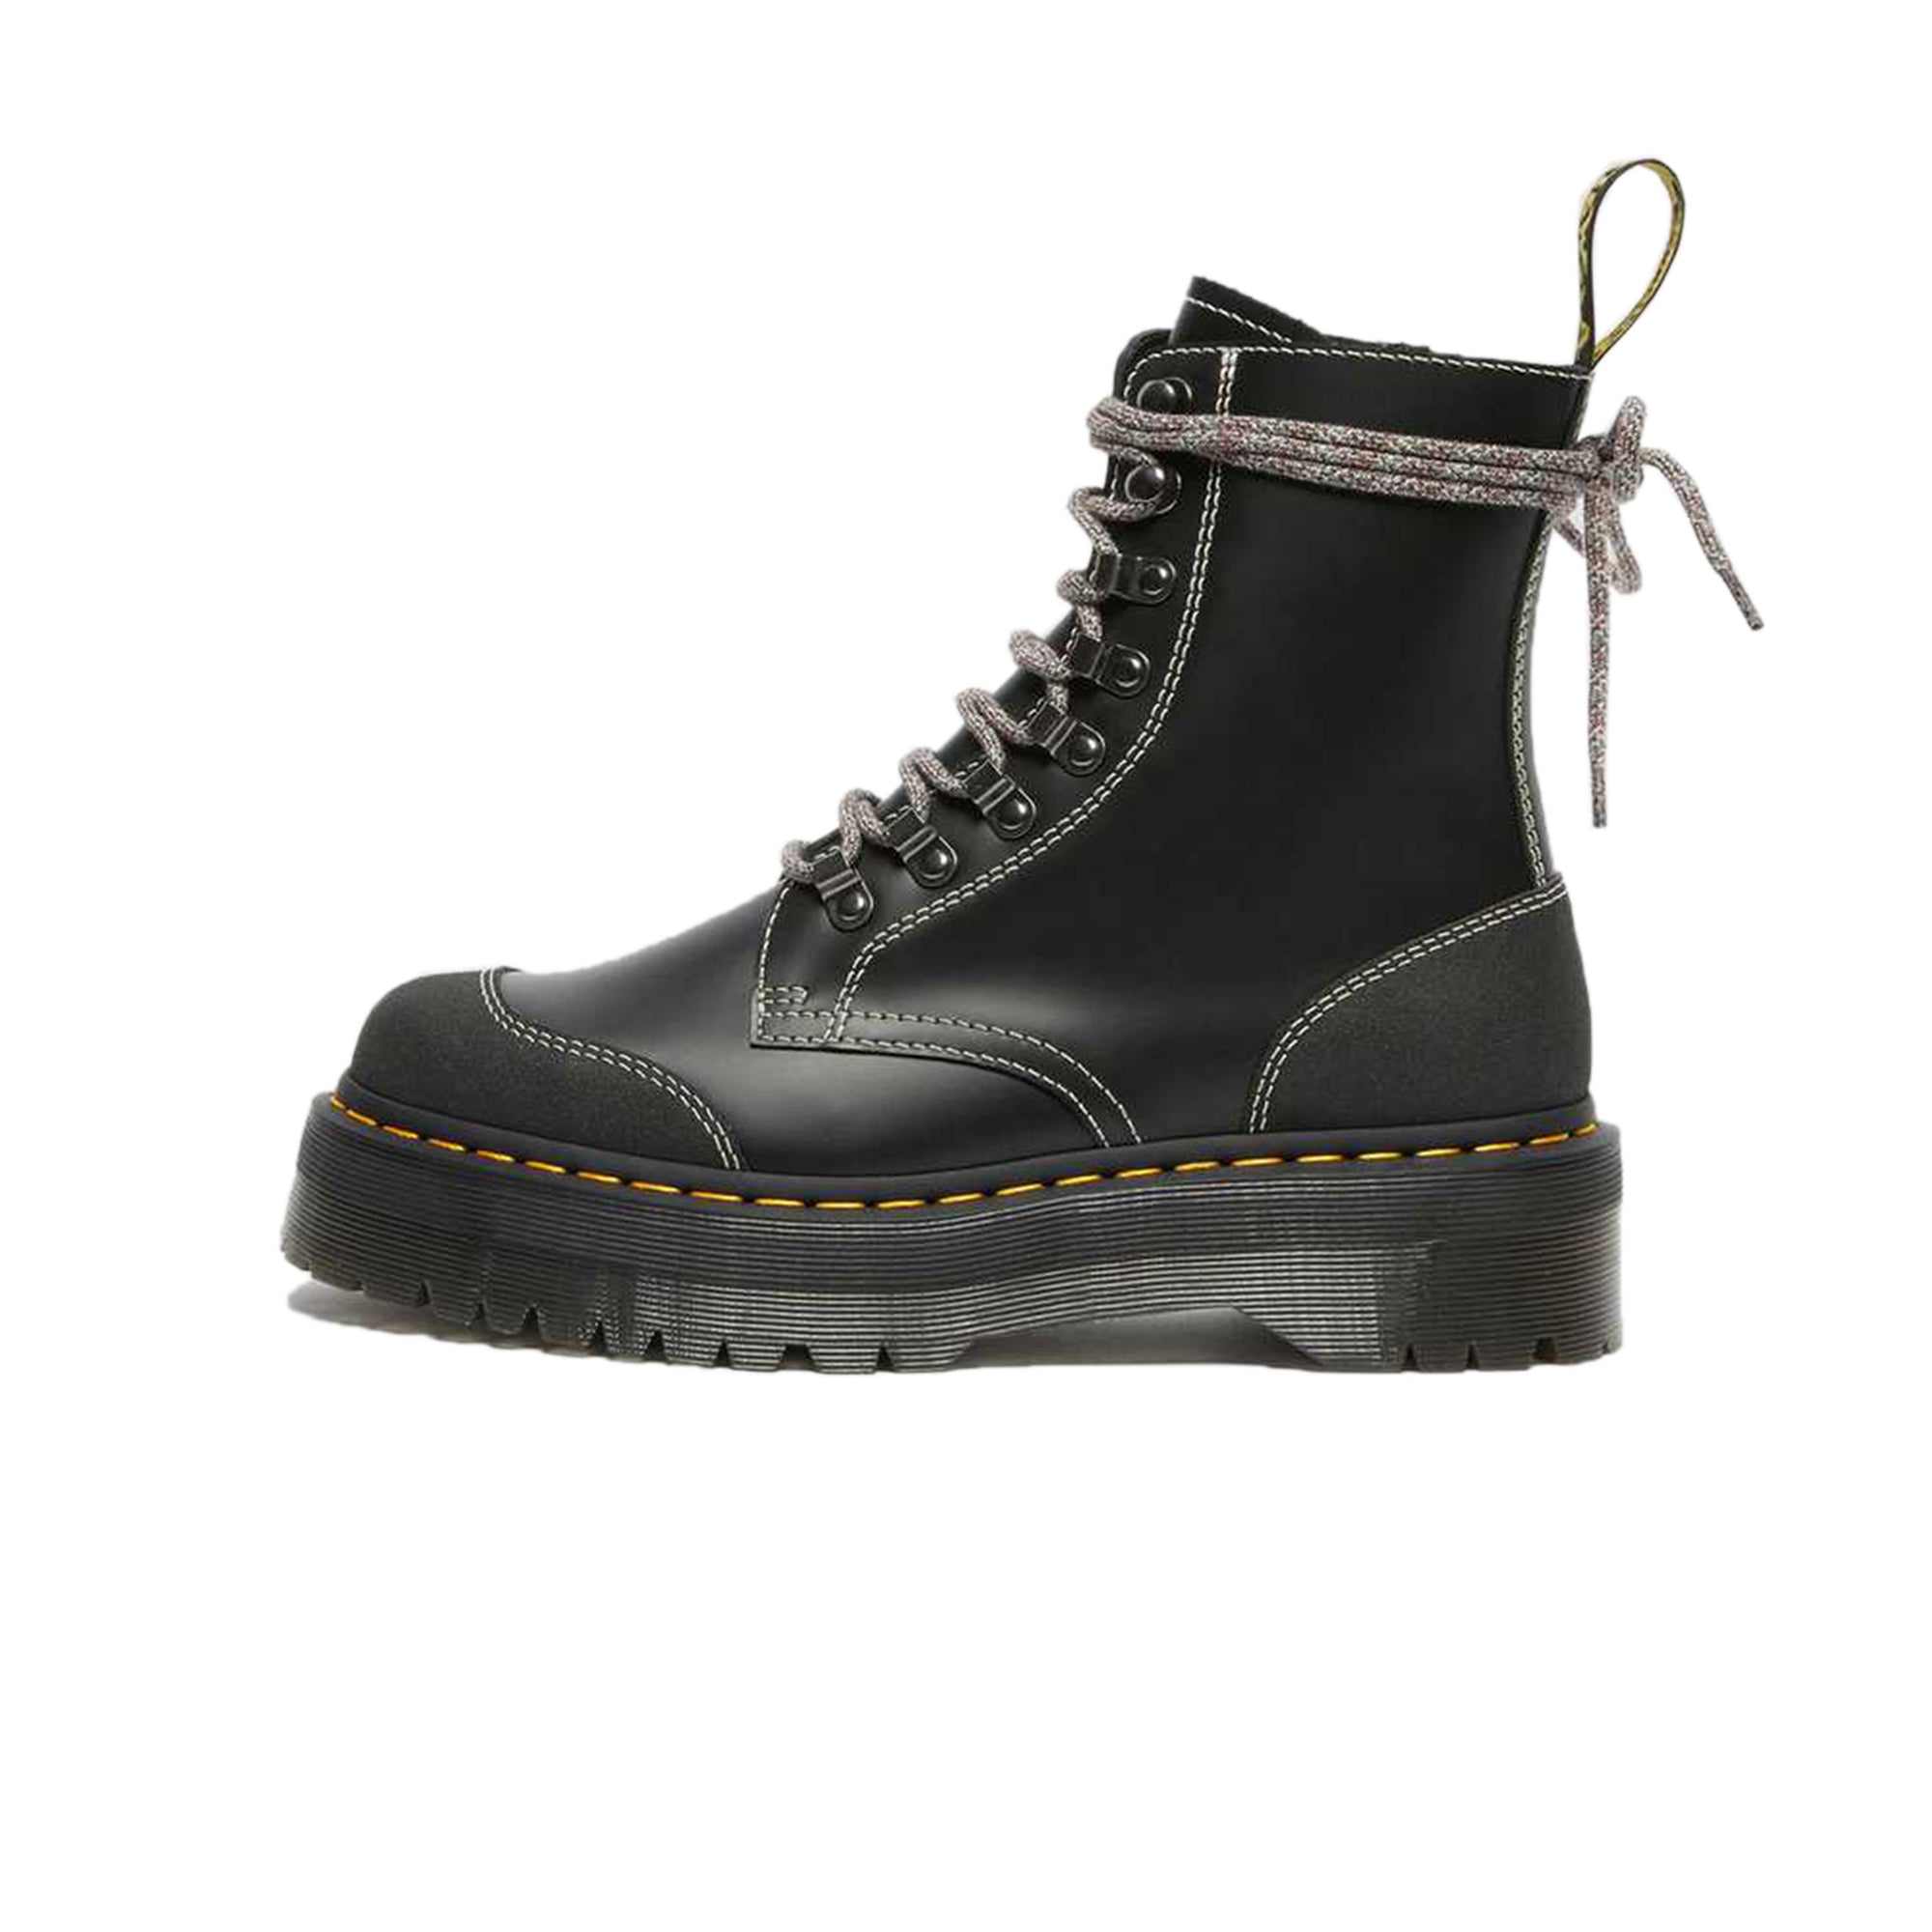 Dr.Martens Moreno Bex Boots – Extra Butter